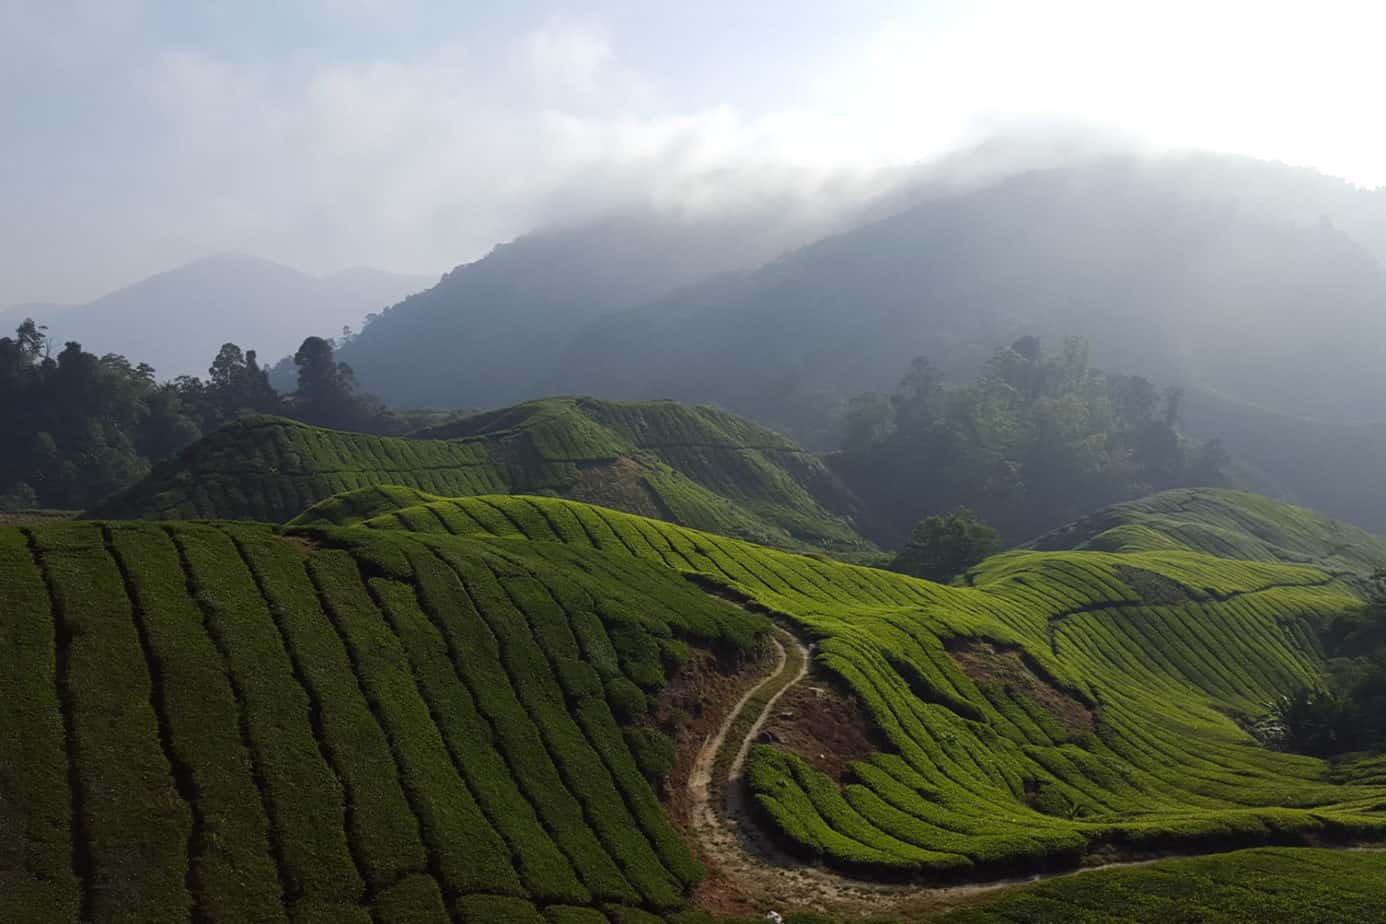 cameron highlands day tour from kl